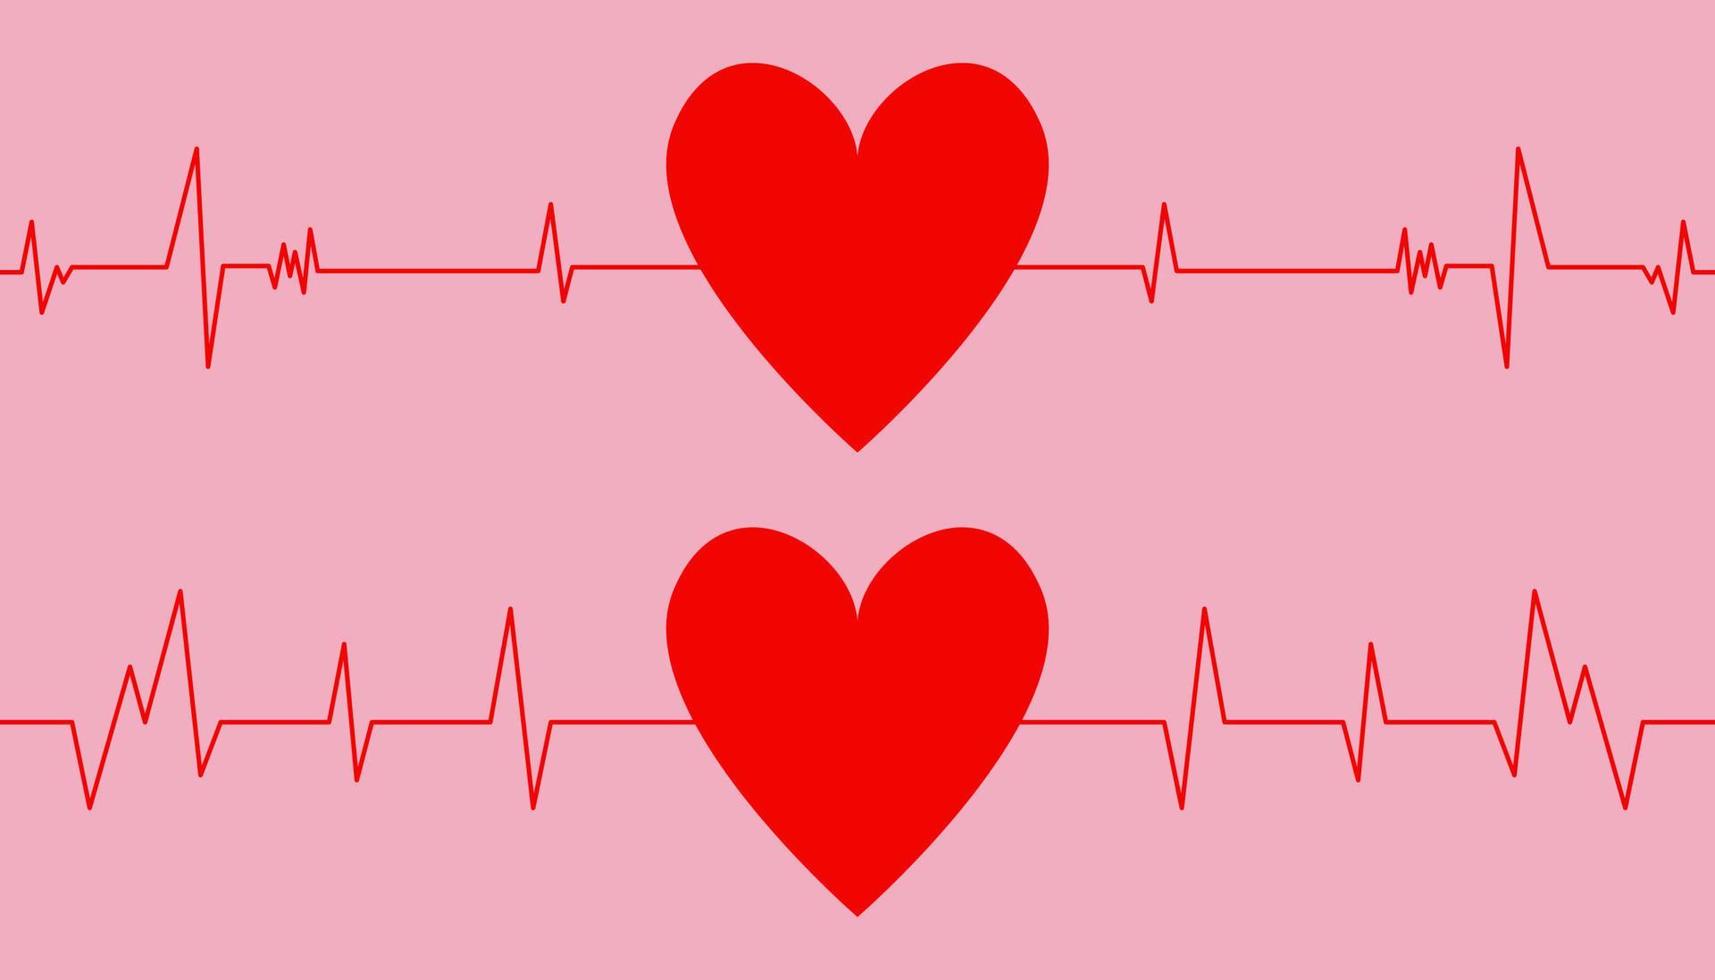 Heart pulse or heartbeat. Concept of saving the patient life. Vector illustration. EPS 10.